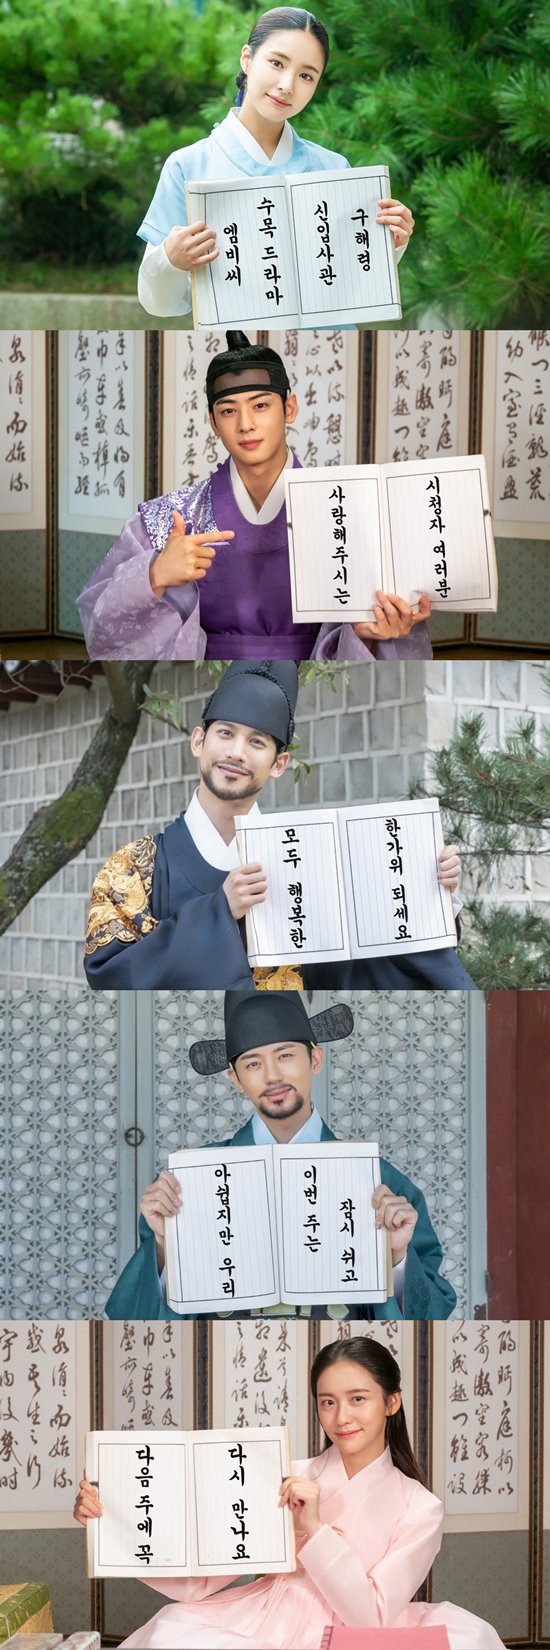 Na Hae-ryung, Shin Se-kyung, Jung Eun-woo, and Park Ki-woong sent Chuseok messages.MBC drama Na Hae-ryung (played by Kim Ho-soo, directed by Kang Il-soo, Han Hyun-hee, produced by Chorokbaem Media) released a video with SteelSeries featuring special Chuseok greetings from actors on the 11th.Na Hae-ryung, starring Shin Se-kyung, Jung Eun-woo, and Park Ki-woong, is the first problematic woman in Joseon (Shin Se-kyung) and the Phil Chung of Prince Lee Rim (Jung Eun-woo) with the antiwar mother Solo. Only romance annals.Lee Ji-hoon, Park Ji-hyun and other young actors such as Kim Ji-jin, Kim Min-sang, Choi Duk-moon and Sung Ji-ru are all out.Five leading figures from the new employee, Na Hae-ryung, greeted viewers ahead of the Chuseok holiday.The SteelSeries released a book and said, All viewers who love MBC drama new recruits Na Hae-ryung, please send a happy party!Unfortunately, we will rest for a while this week and meet again next week. Shin Se-kyung, who is wearing a blue military uniform and boasts a refreshing charm, said, I am taking a pleasant picture of the love and support you send. He also said, I hope you have a happy holiday.Then, Jung Eun-woo, who echoed viewers with a sad confession on the air last week, caused the hearts of those who saw it with a thrilling smile.Well come to a rich holiday and well come to a rich story, he said, raising expectations for next weeks broadcast.Park Ki-woong also laughed at those who said, I hope you have a good time with your family in the national holiday, showing off the charm of soft reversal, unlike the charismatic appearance in the play.Lee Ji-hoon also said, Unlike the blunt officer Min Woo-won, he gave a pleasant Chuseok greeting with a playful appearance. He said, I started shooting in hot summer, but it is Chuseok.I hope you have a good time with your family.  Please love Na Hae-ryung! Finally, Park Ji-hyun caught his eye with a beautiful uniform, not a military uniform.She said with a sweet smile, I will be very sorry for the Chuseok holiday, but I would like to ask for more love and support next week.On the other hand, Na Hae-ryung, a new employee, will be broadcast on the 11th and 12th of Chuseok holidays and will be broadcast at 8:55 pm on the 18th.Photo Offering Chorokbaem Media